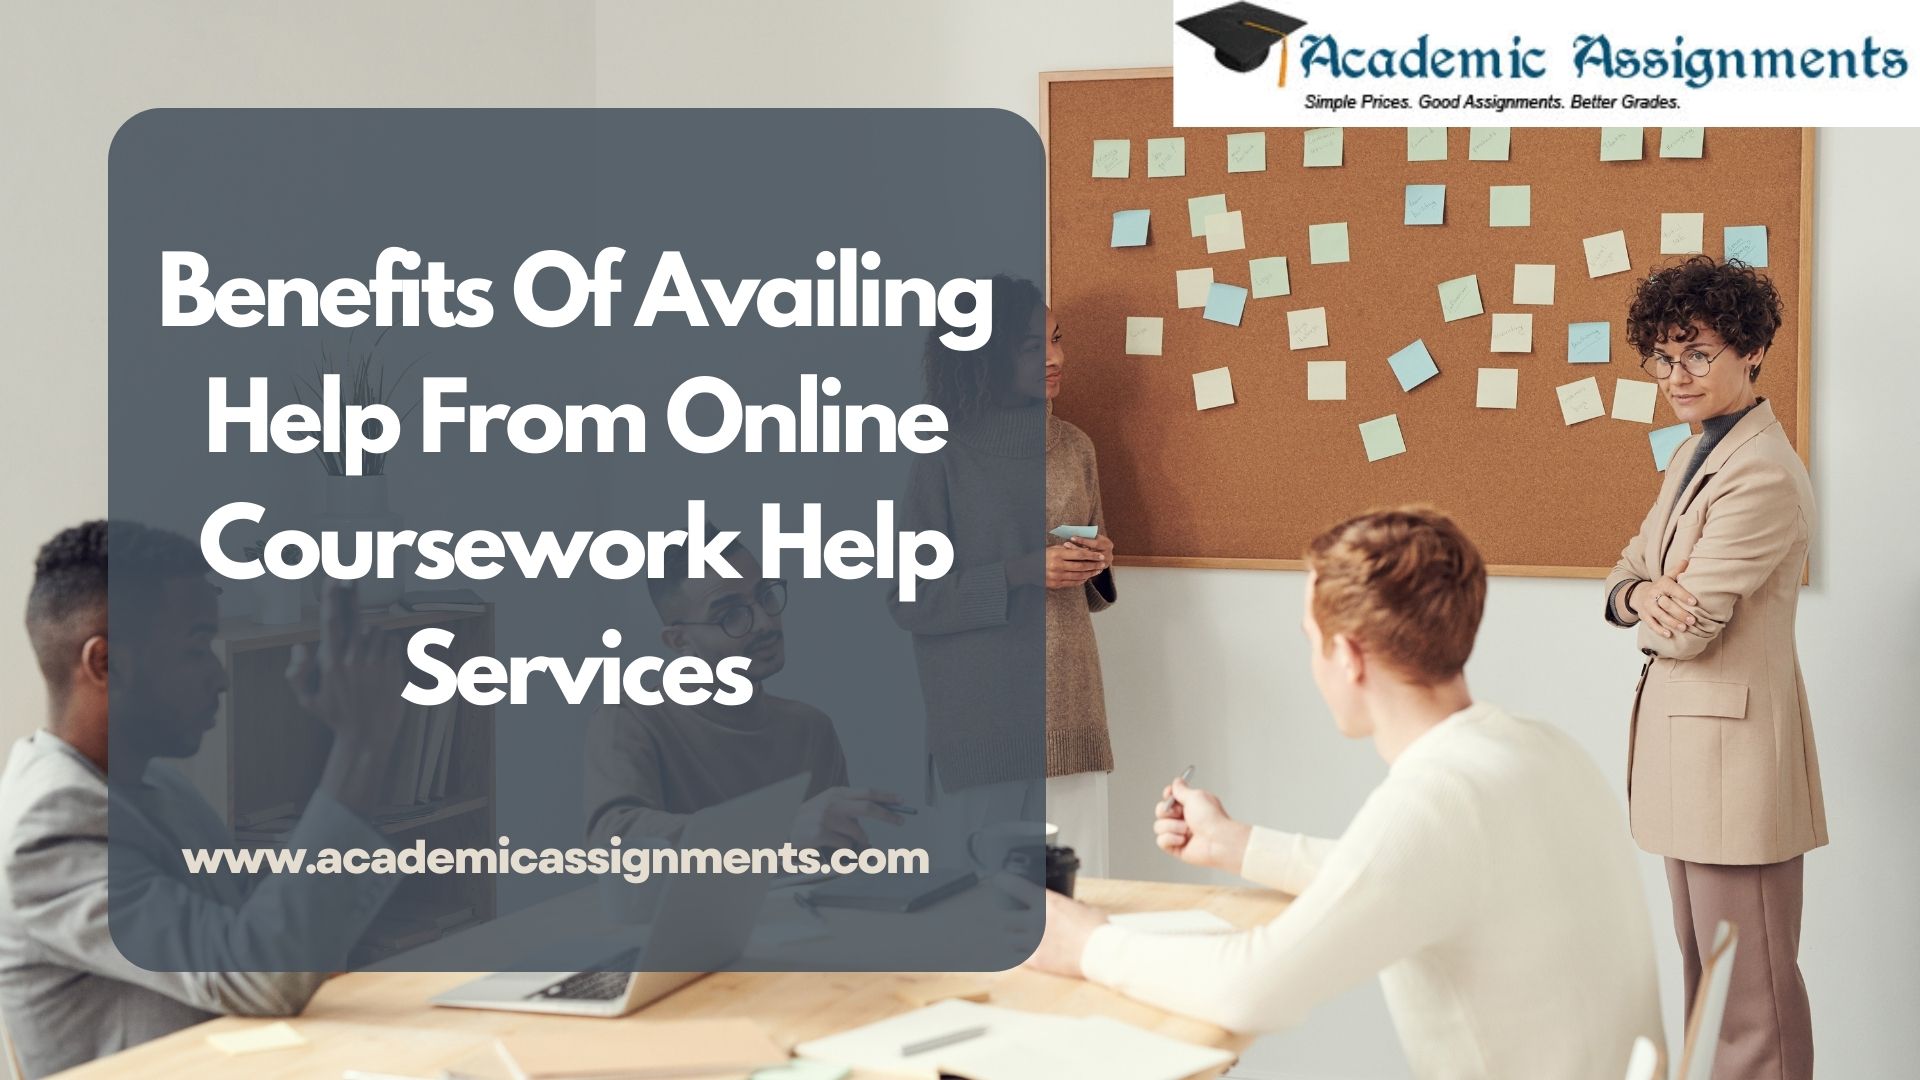 Benefits Of Availing Help From Online Coursework Help Services